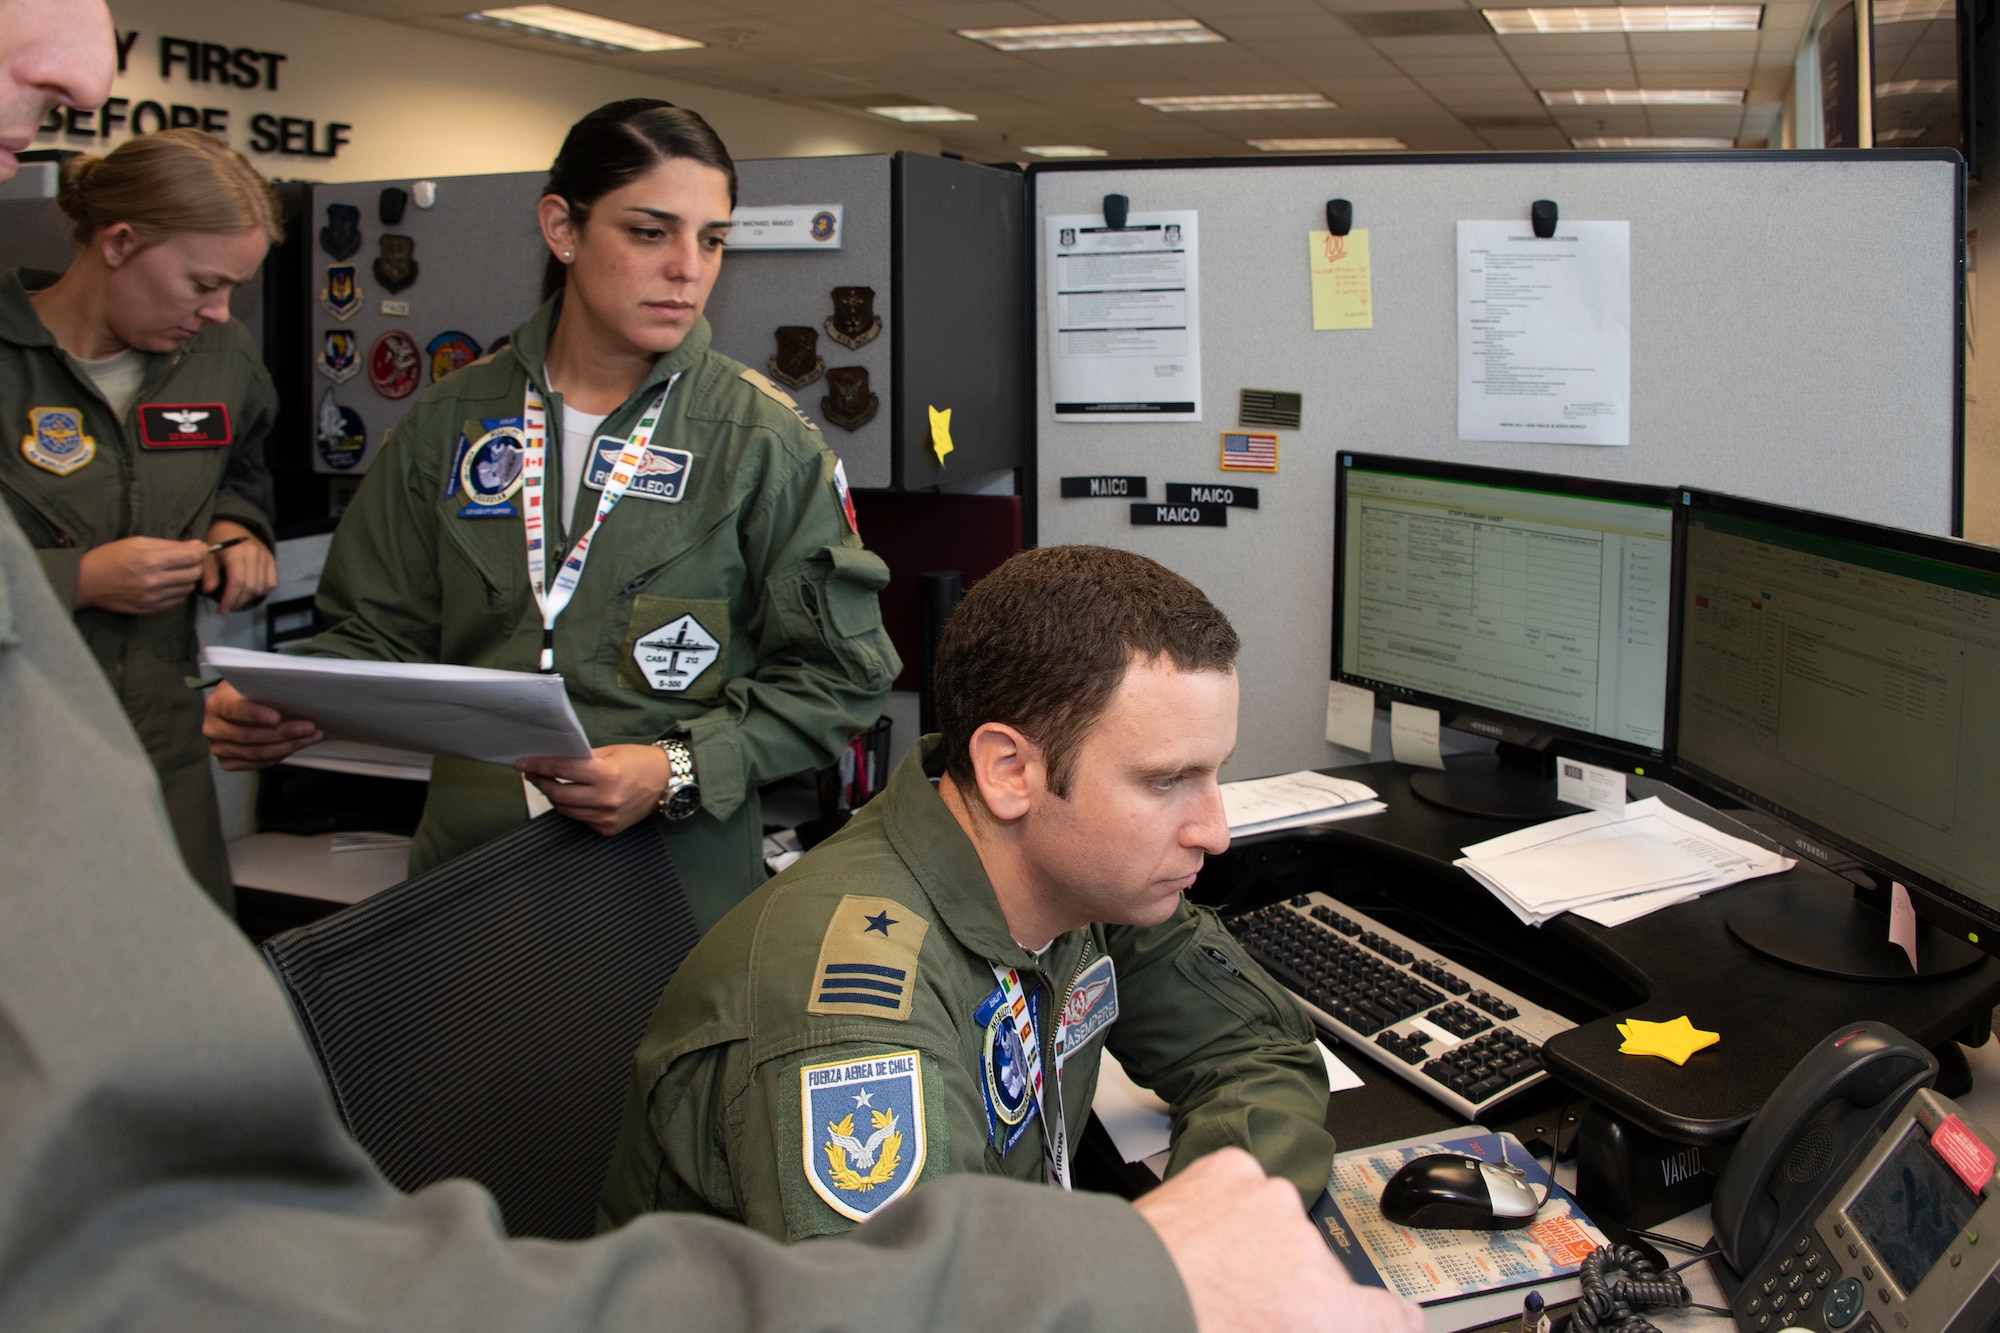 Chilean Air Force Capts. Romina Rebolledo, C-212 transport pilot and liaison  officer to the Brigade General and Felipe Casasempere, F-16 pilot and chief of planning for the 3rd Squadron, listen to a phone call during exercise Mobility Guardian Sept. 25, 2019, at Travis Air Force Base, California. MG19 is Air Mobility Command’s full spectrum readiness exercise, designed to strengthen and improve integrated teamwork. U.S. aircraft joined aircraft from more than two dozen nations along with more than 4,000 U.S. and international Air Force, Army, Navy, and Marine Corps service members. (U.S. Air Force photo by Heide Couch)